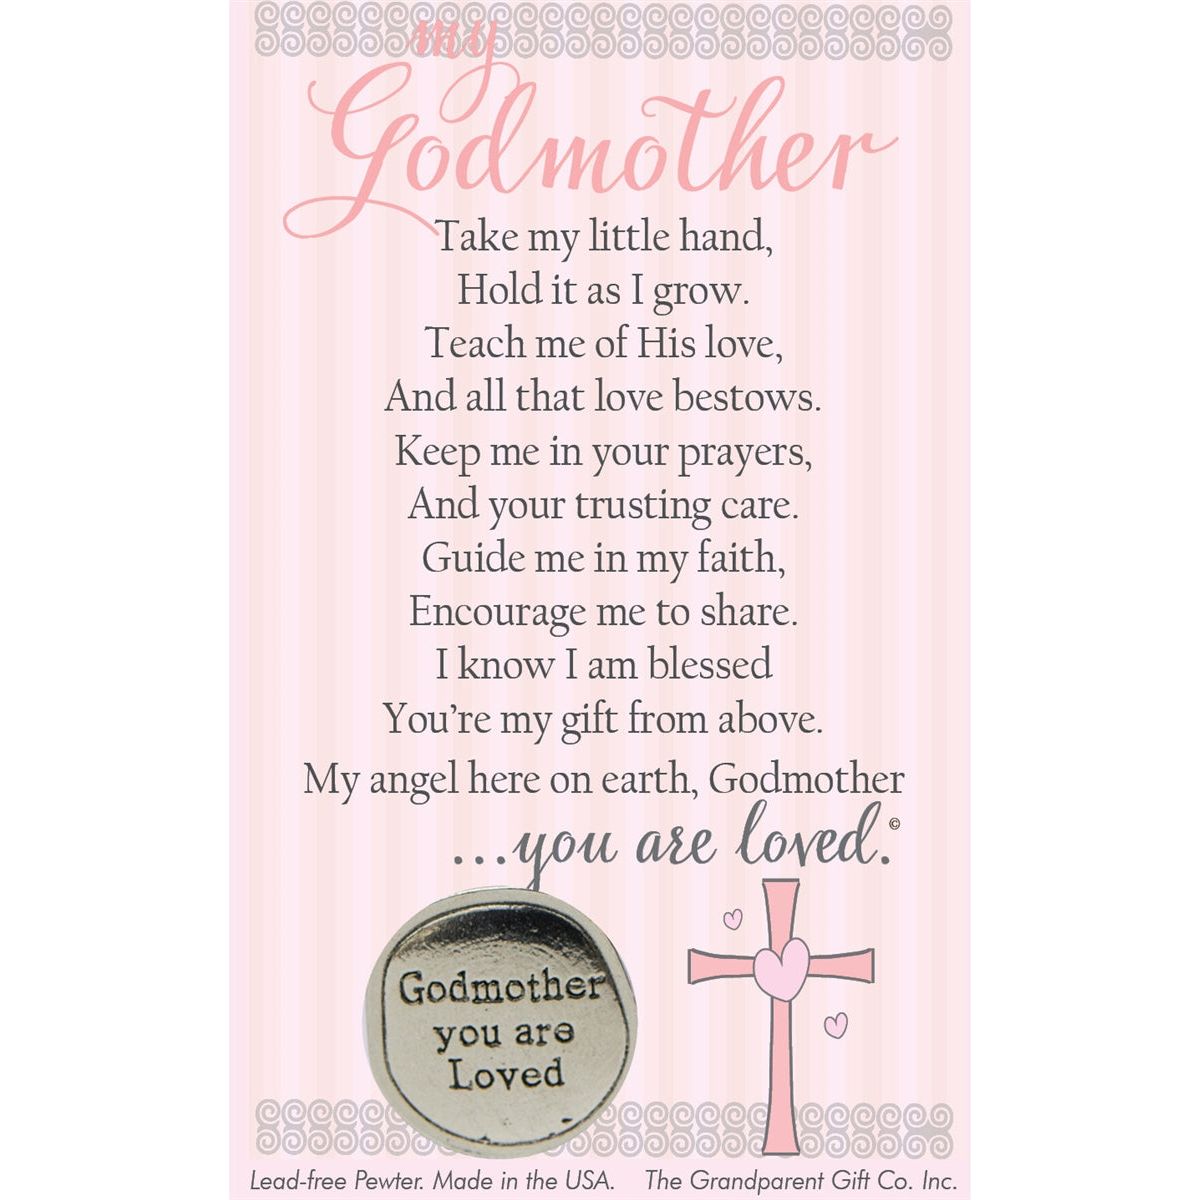 Godmother Gift: Handmade Pewter Coin